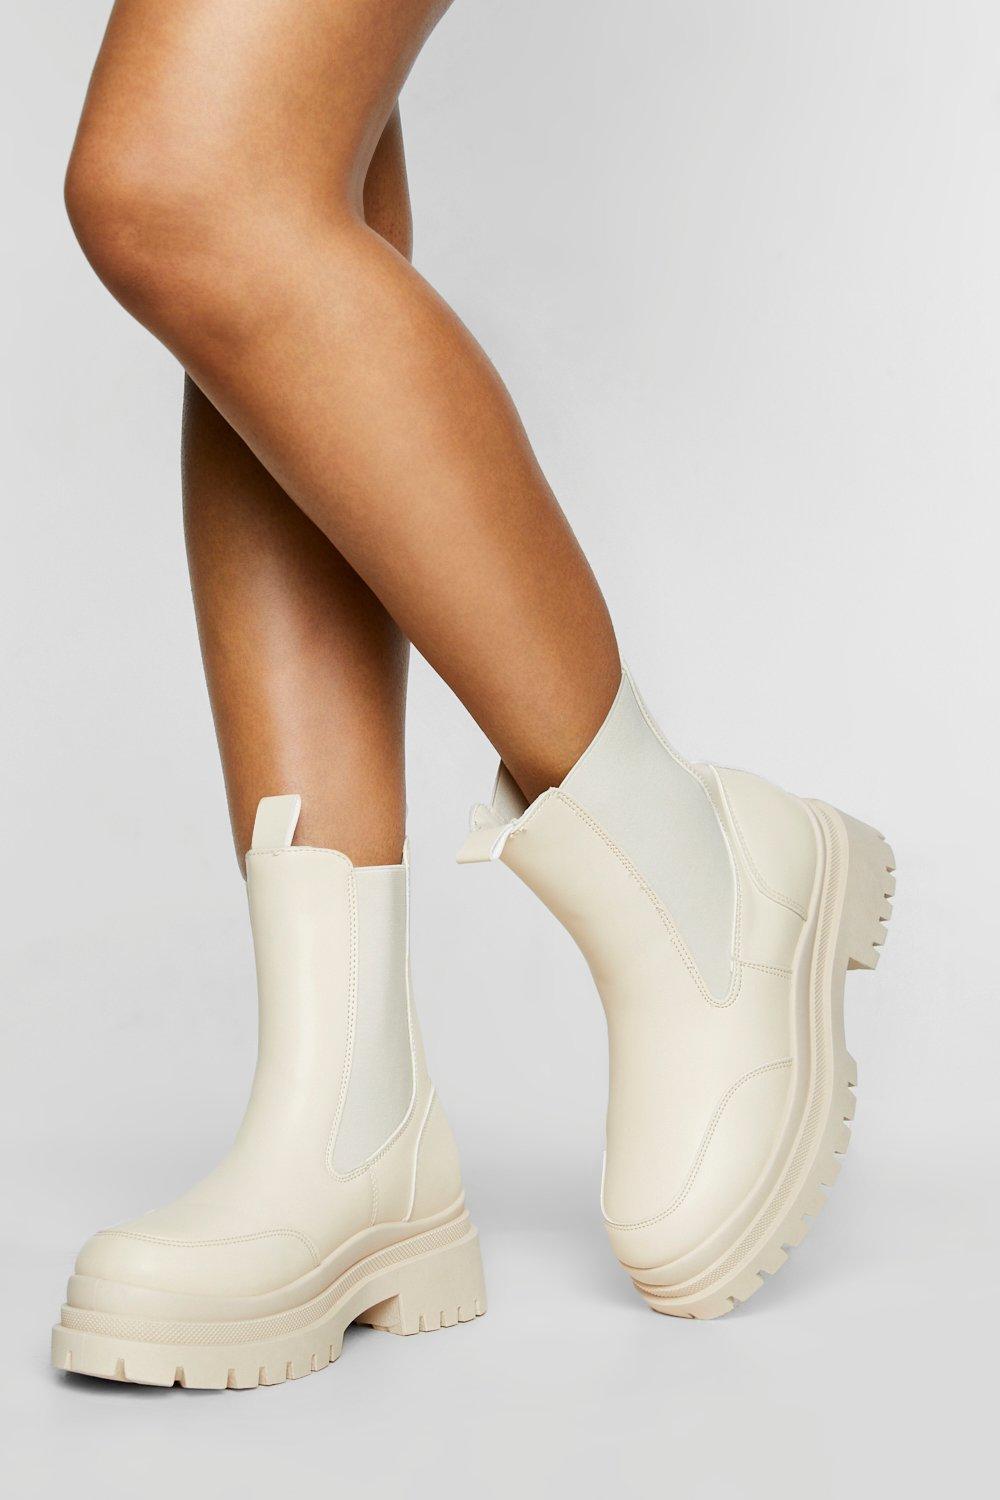 Womens Wide Fit Chunky Wave Sole Chelsea Boots - White - 5, White